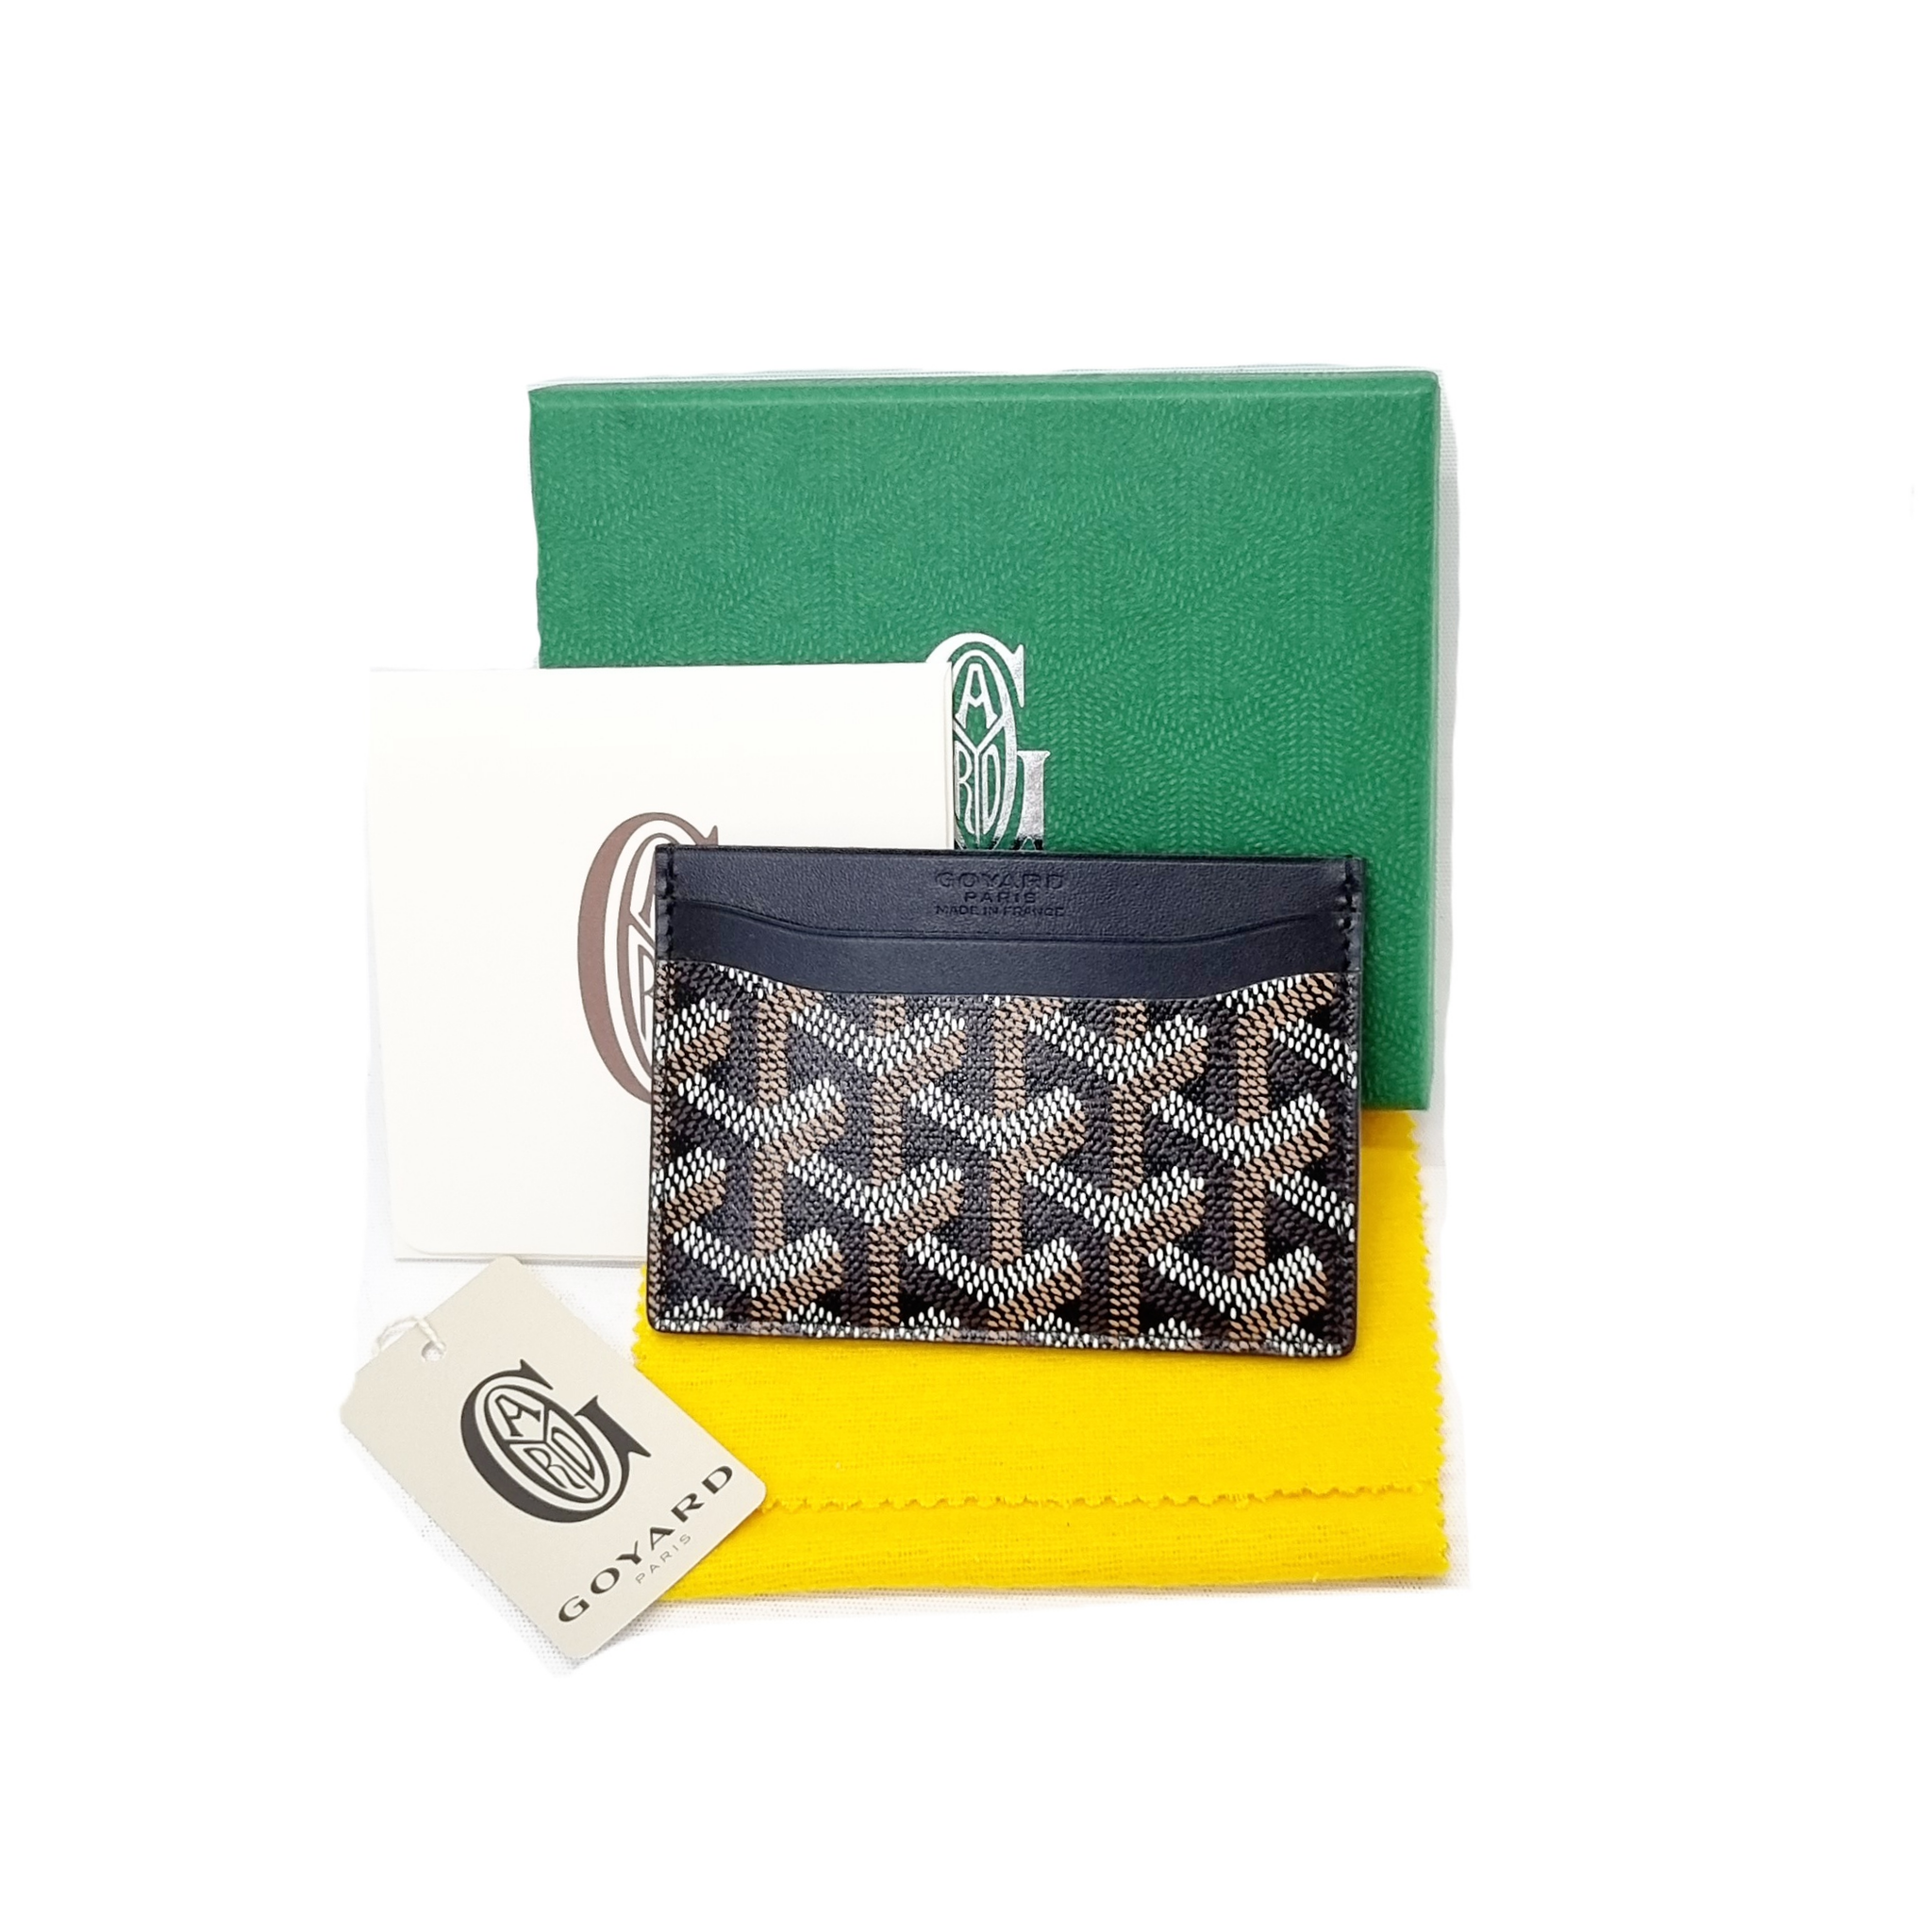 Brand New Goyard Saint Sulpice Cardholder Available In Store